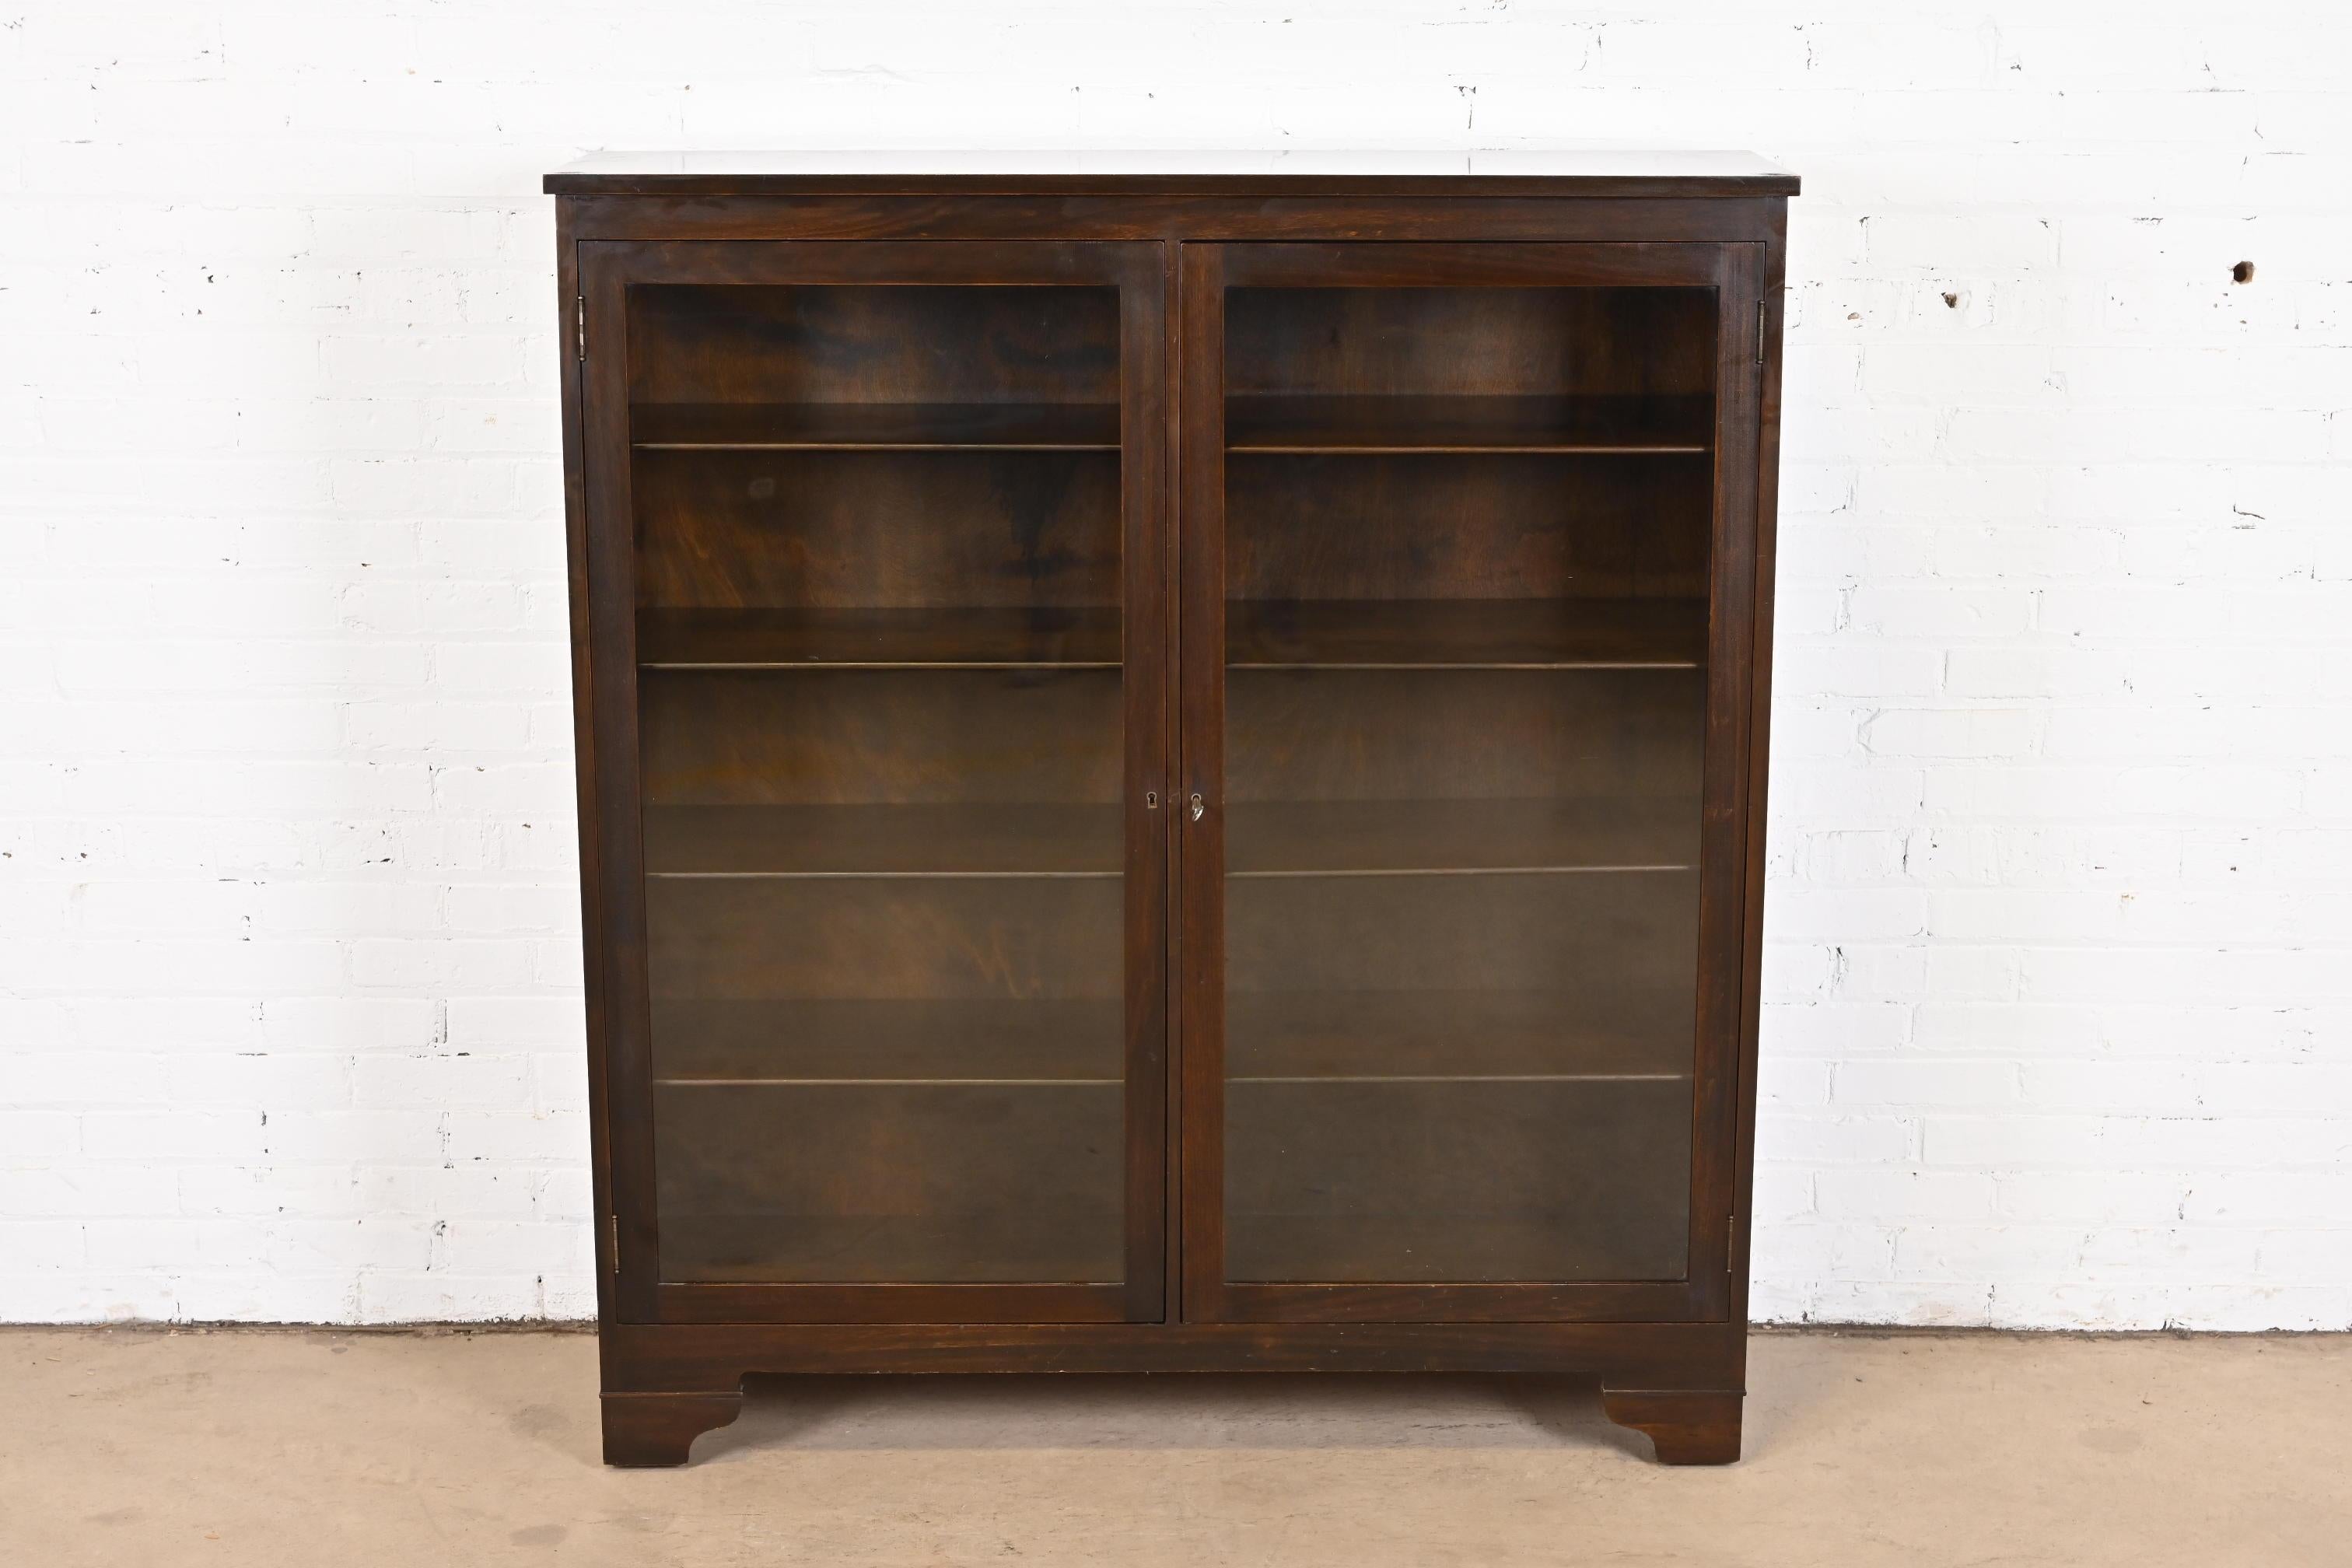 A gorgeous antique Arts & Crafts double bookcase

In the manner of Stickley Brothers

By John D. Raab Chair Co.

USA, circa 1900

Mahogany, with glass front doors.

Measures: 48.63